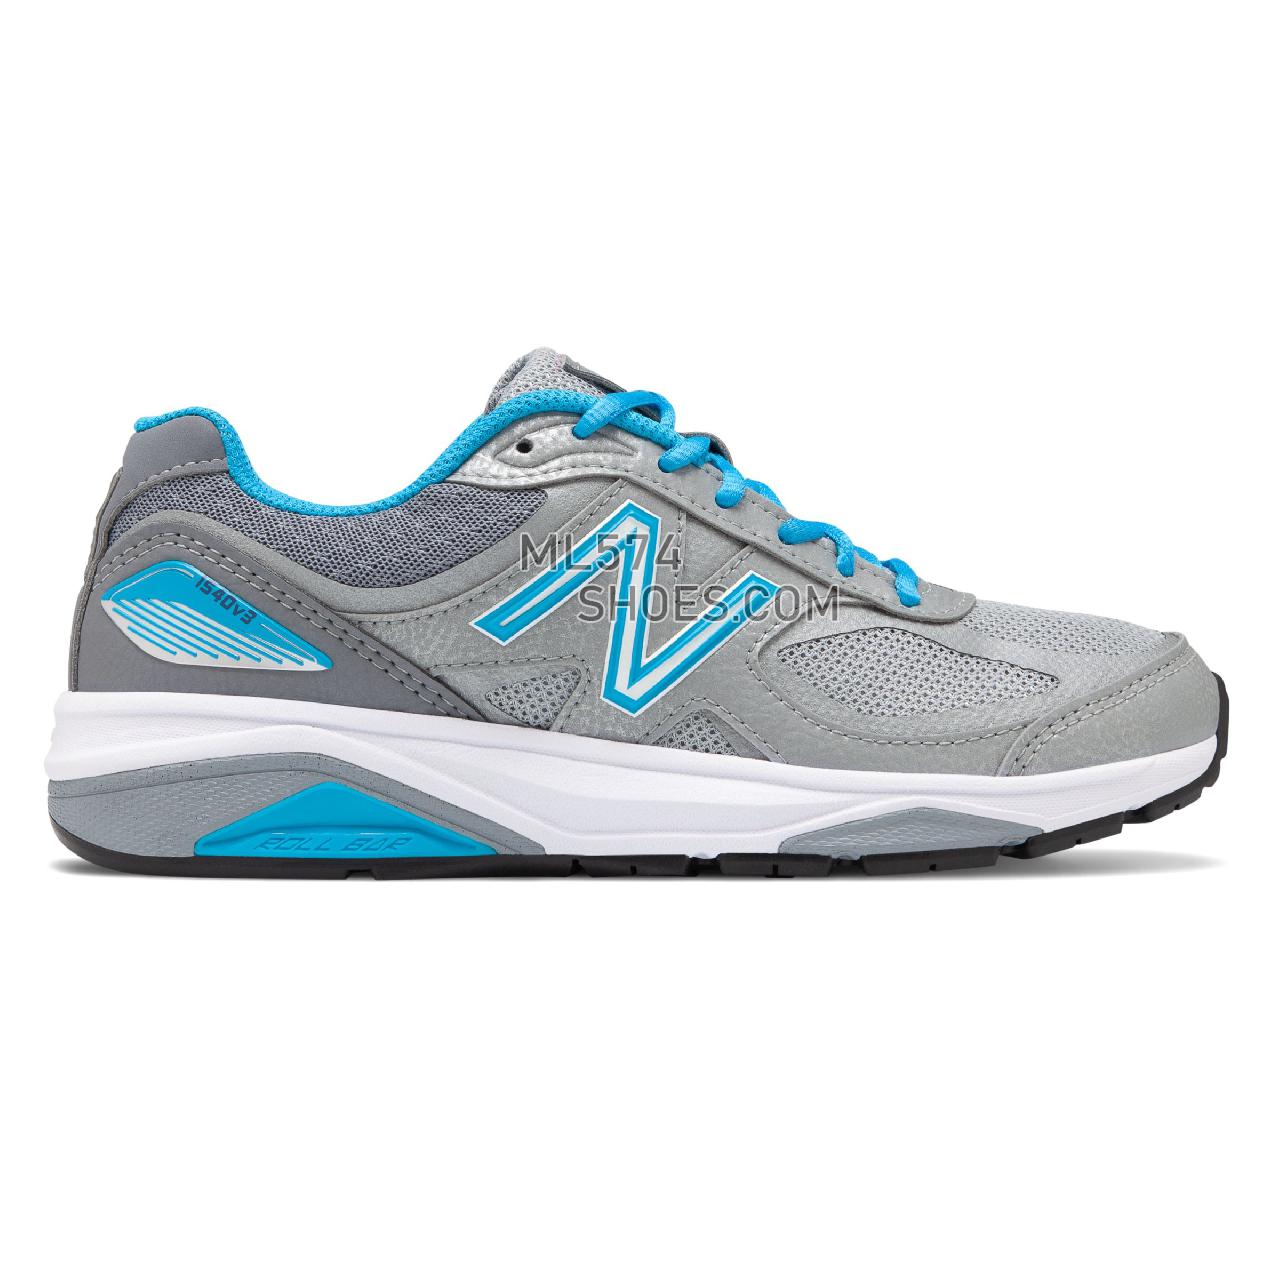 New Balance Made in US 1540v3 - Women's Motion Control Running - Silver with Polaris - W1540SP3